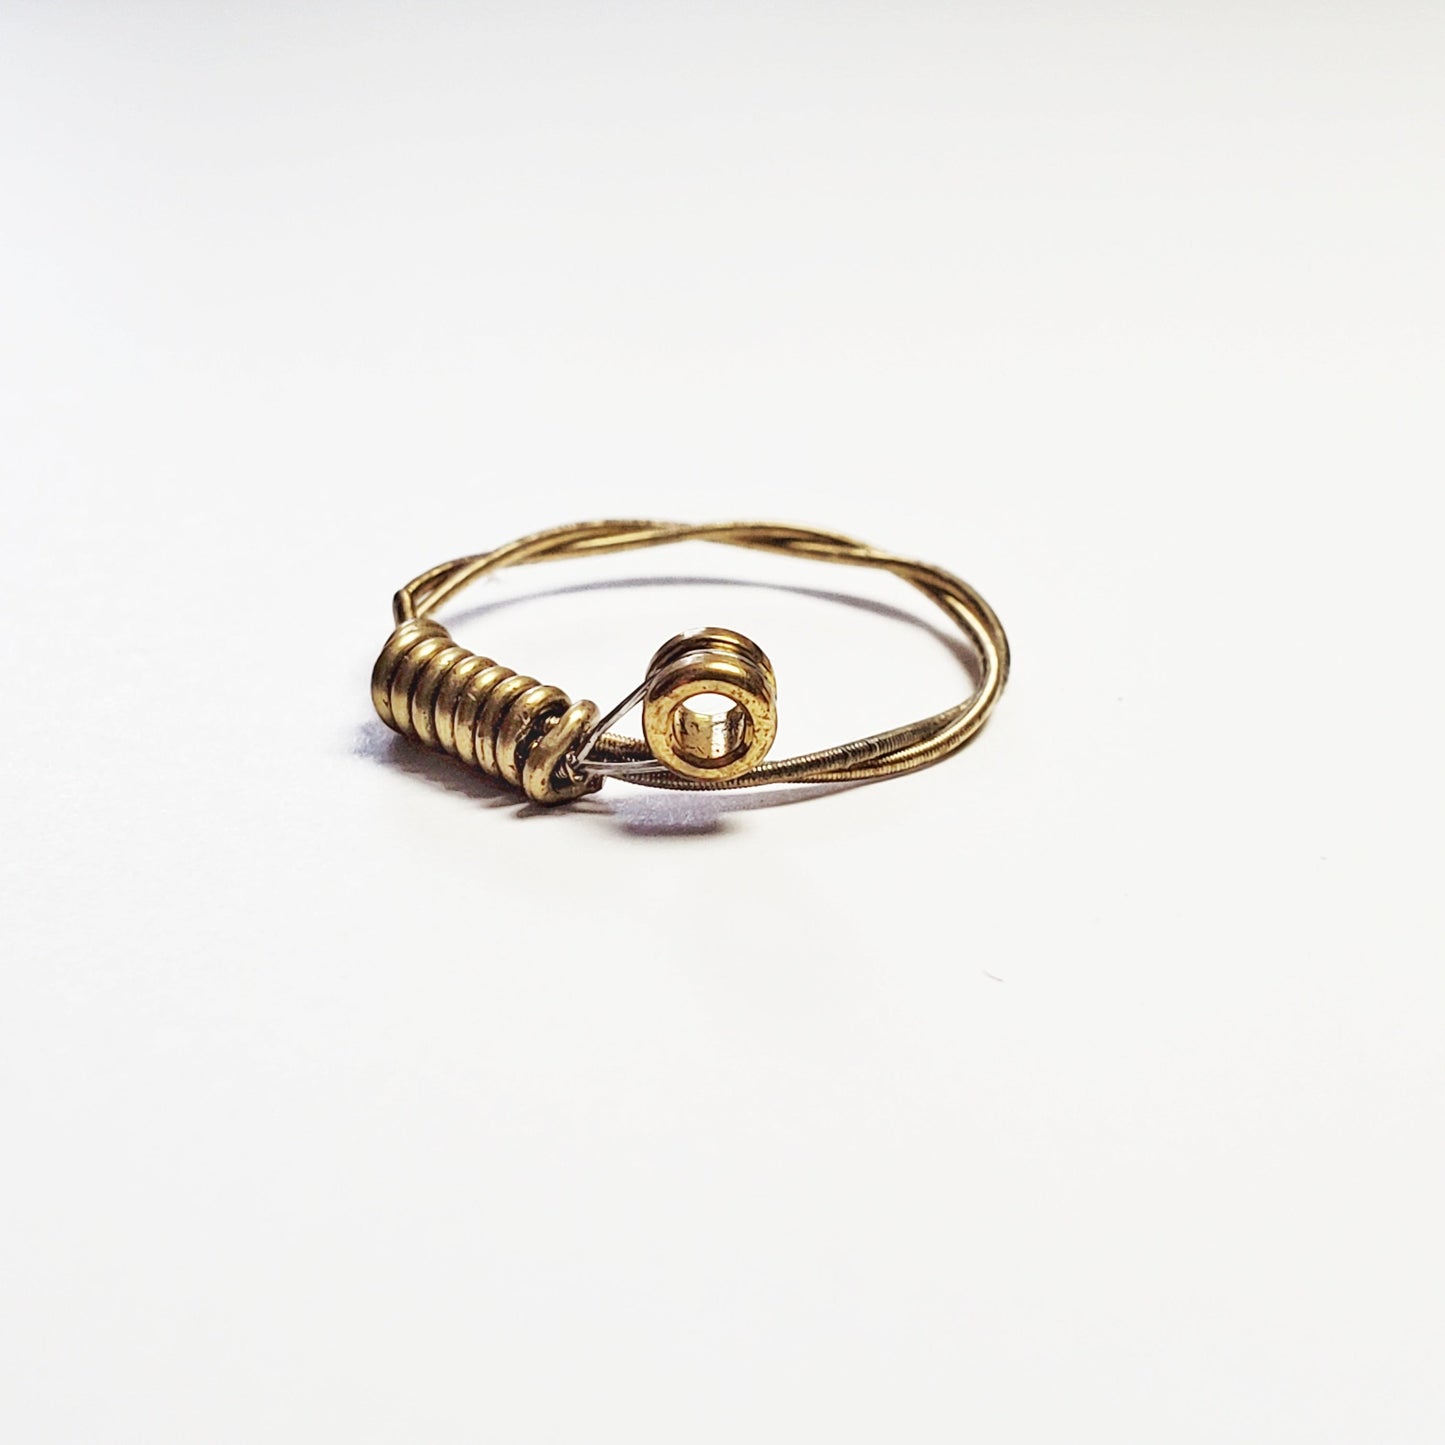 a gold coloured guitar string ring - white background